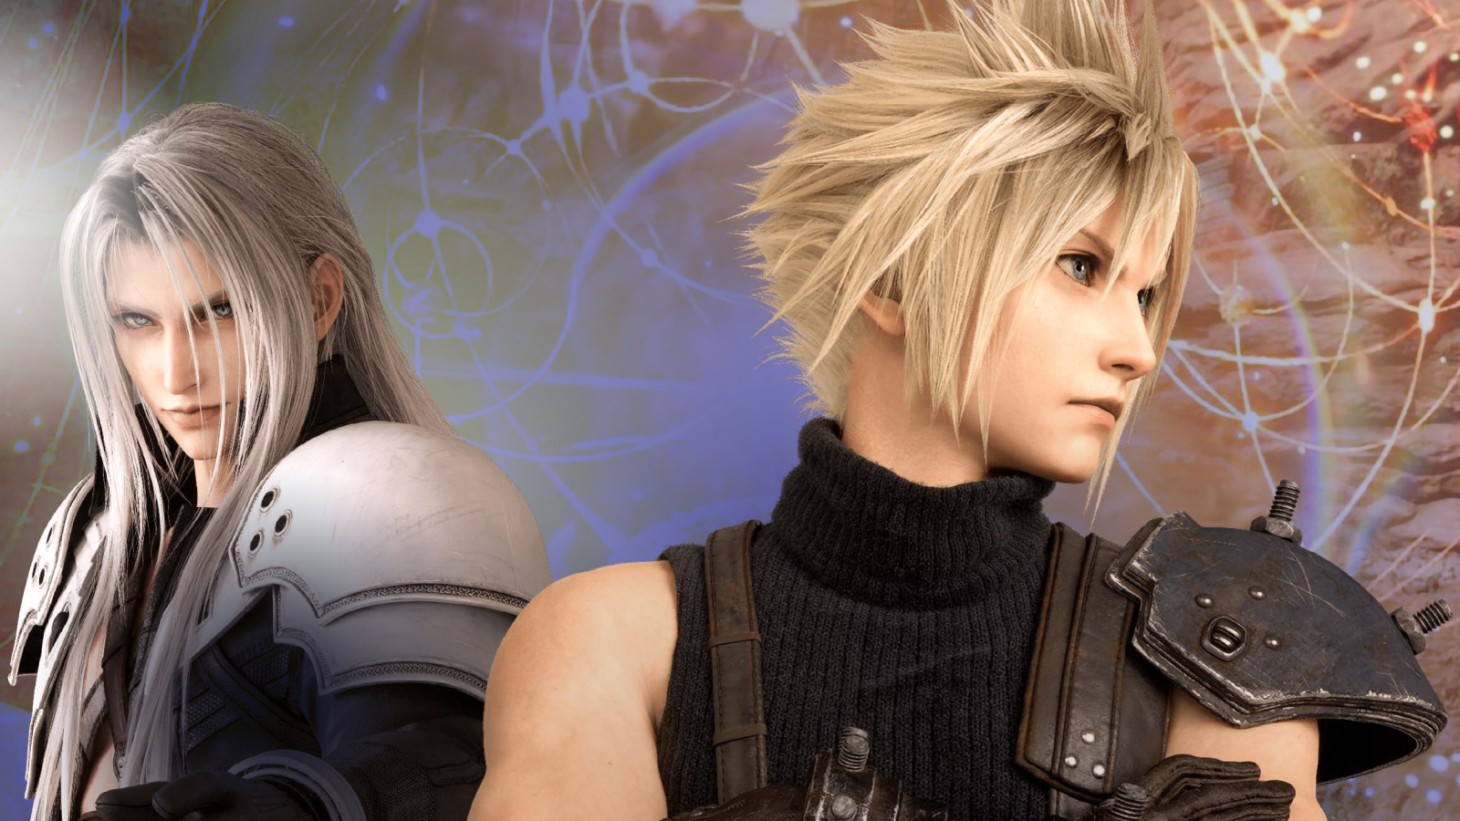 Final Fantasy 7 Rebirth is currently the second-highest scoring Final  Fantasy on Metacritic